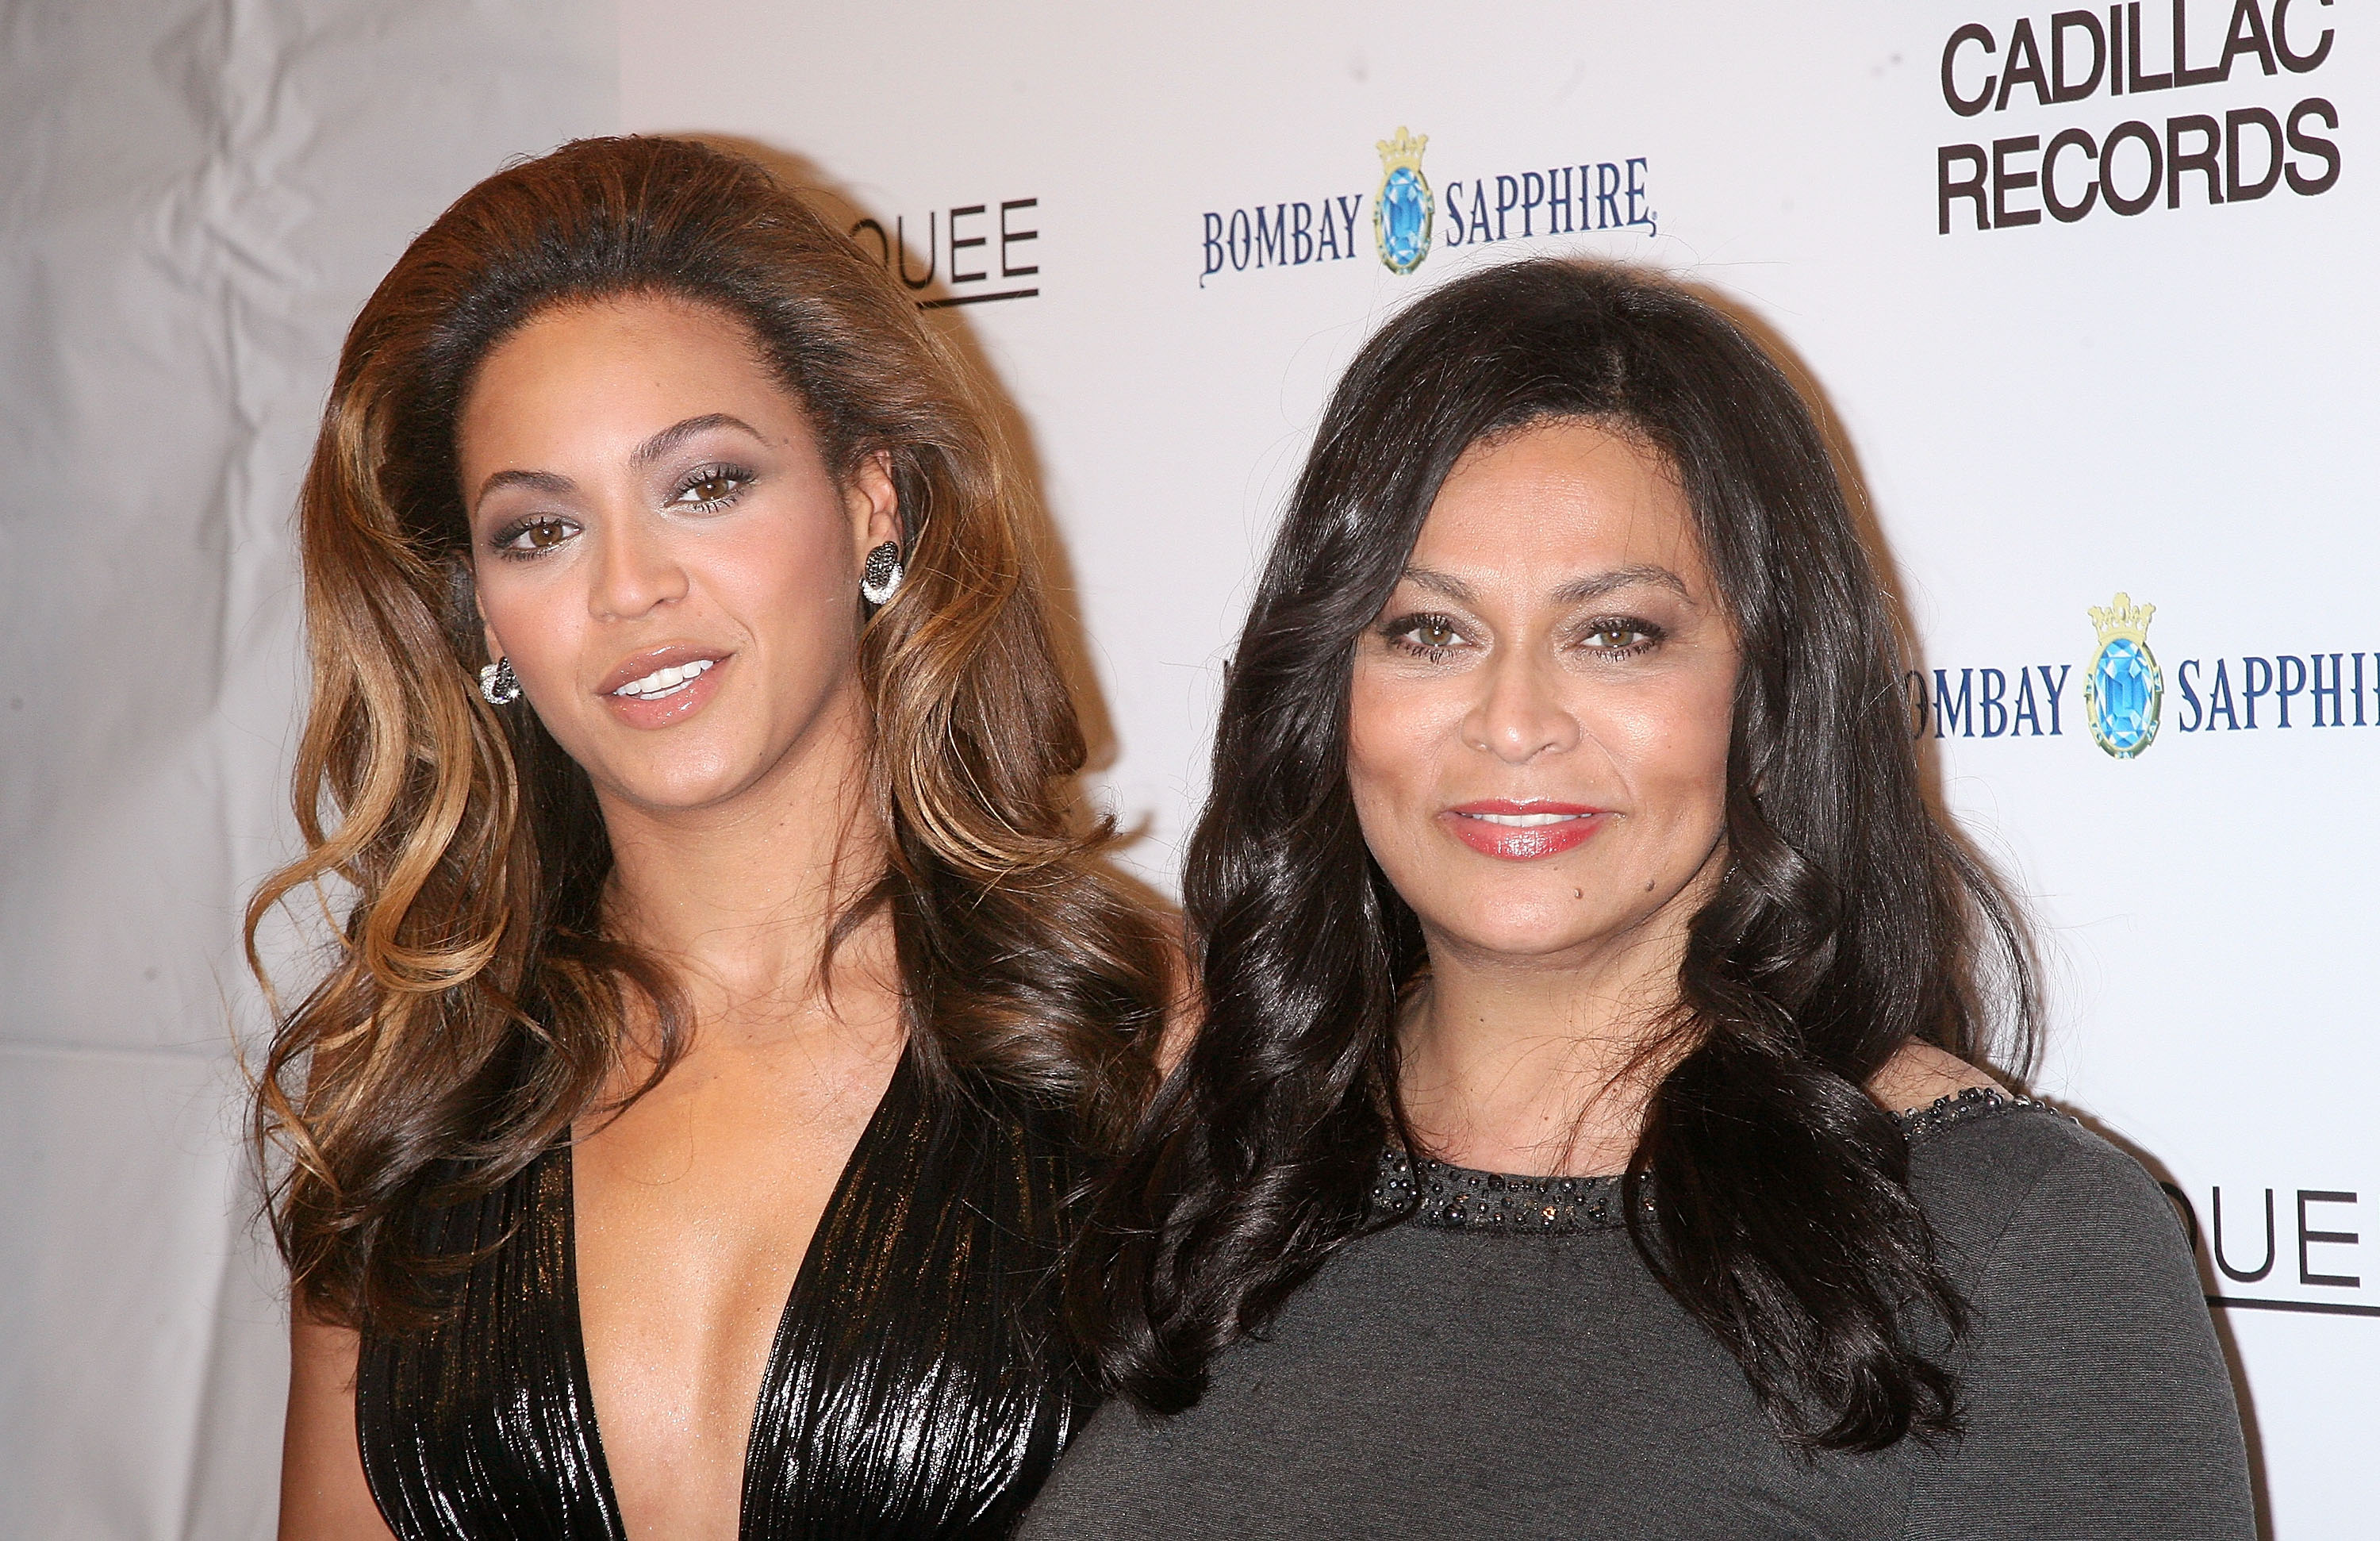 Beyoncé and her mother Tina Knowles at the premiere of "Cadillac Records" on December 1, 2008, in New York City. | Source: Getty Images